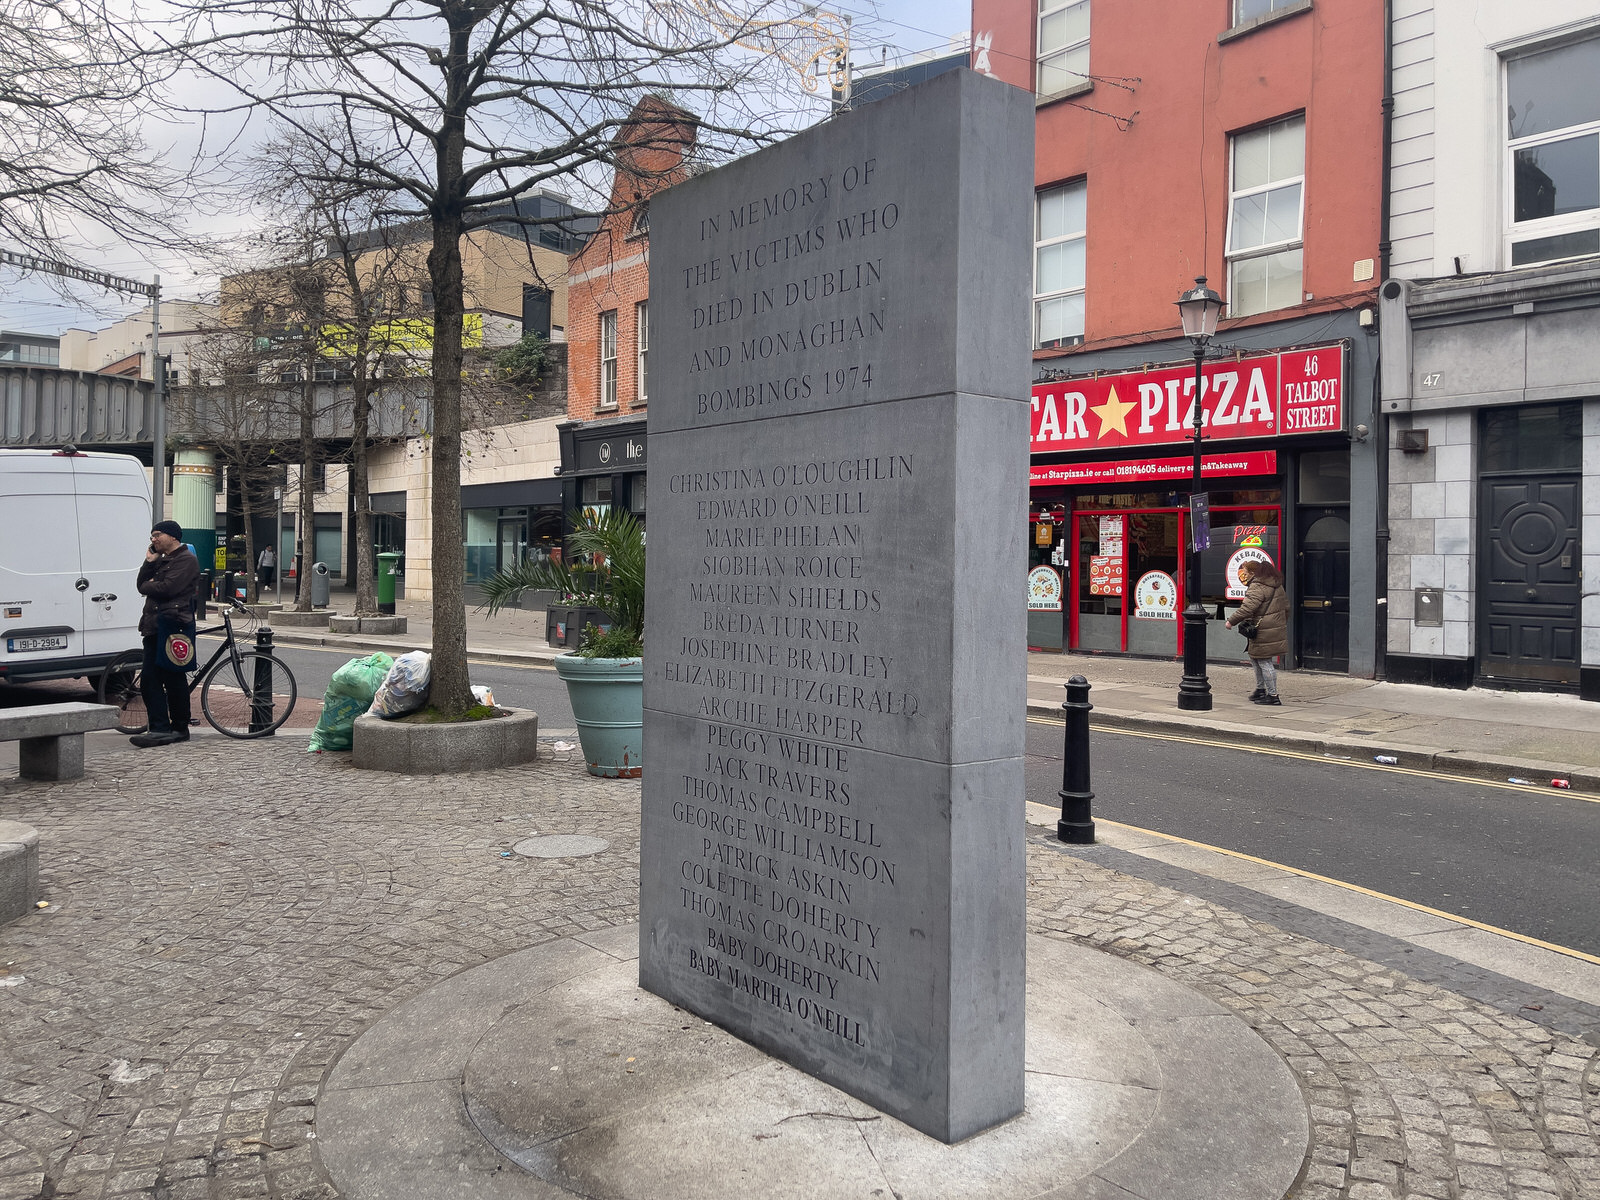 TODAY FELT THAT IT WAS APPROPRIATE TO PHOTOGRAPH THE DUBLIN AND MONAGHAN BOMBING MEMORIAL [THIS IS LOCATED ON TALBOT STREET] 005